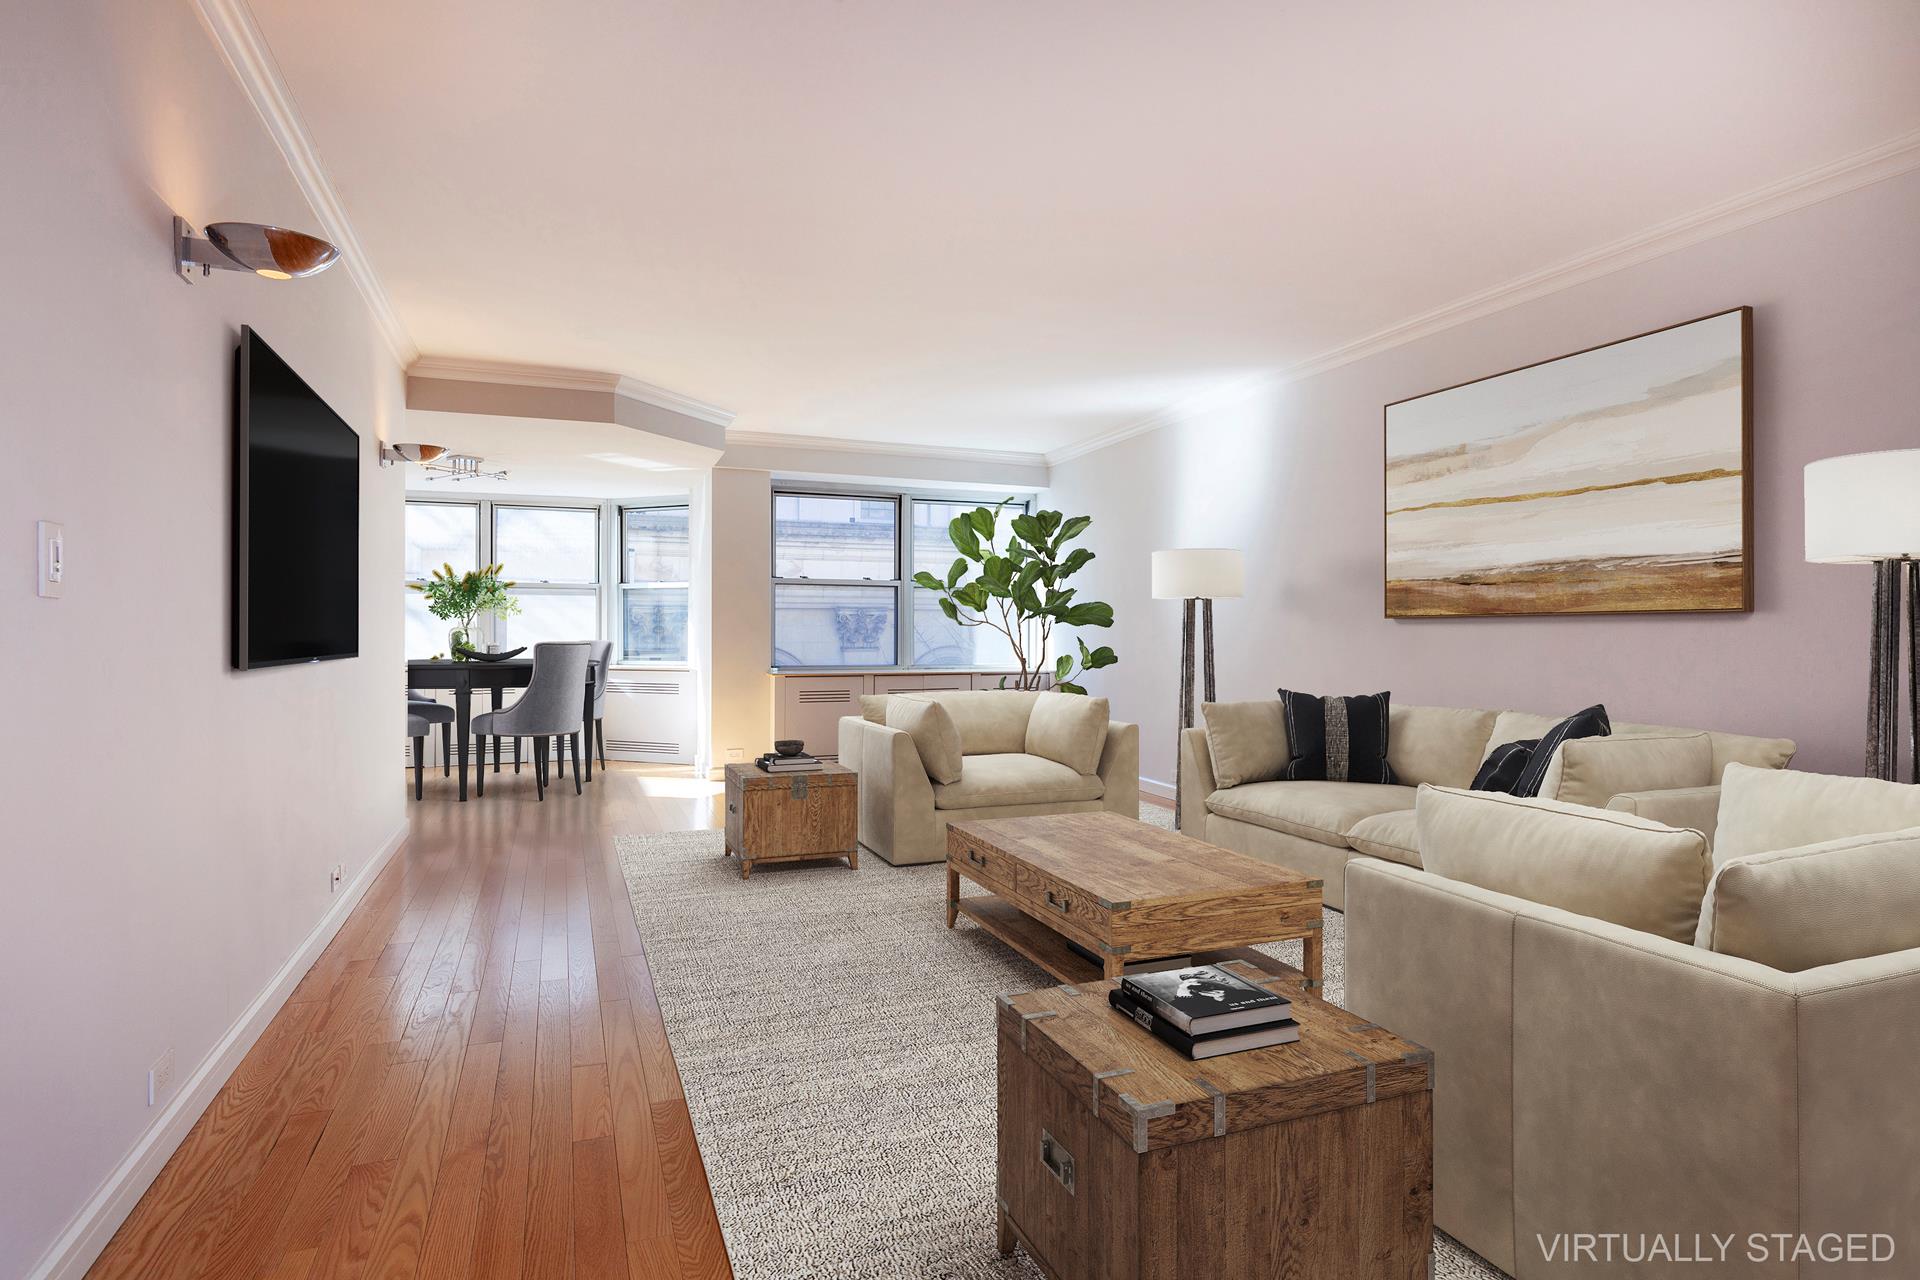 155 East 76th Street 5H, Lenox Hill, Upper East Side, NYC - 3 Bedrooms  
2 Bathrooms  
5 Rooms - 